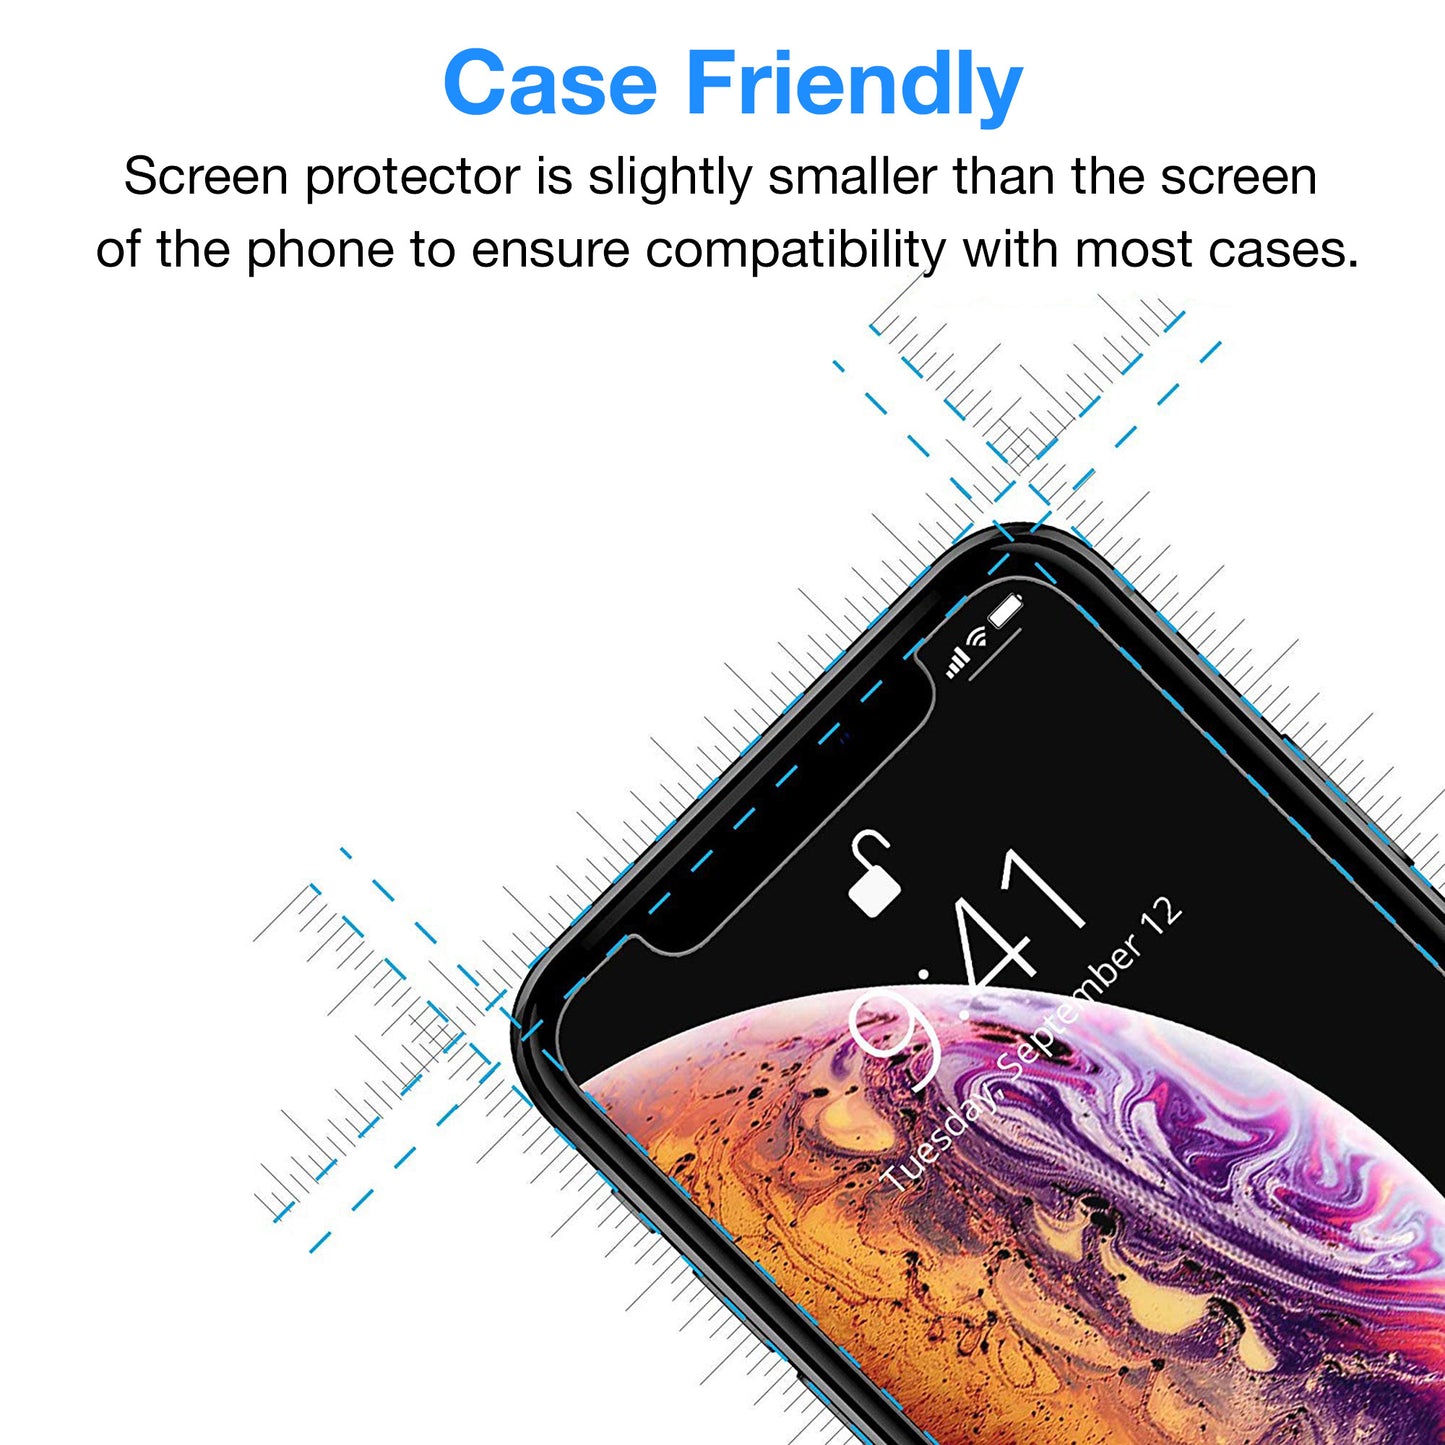 [2 Pack] MEZON Apple iPhone XR (6.1") Tempered Glass Crystal Clear Premium 9H HD Case Friendly Screen Protector (iPhone XR, 9H)